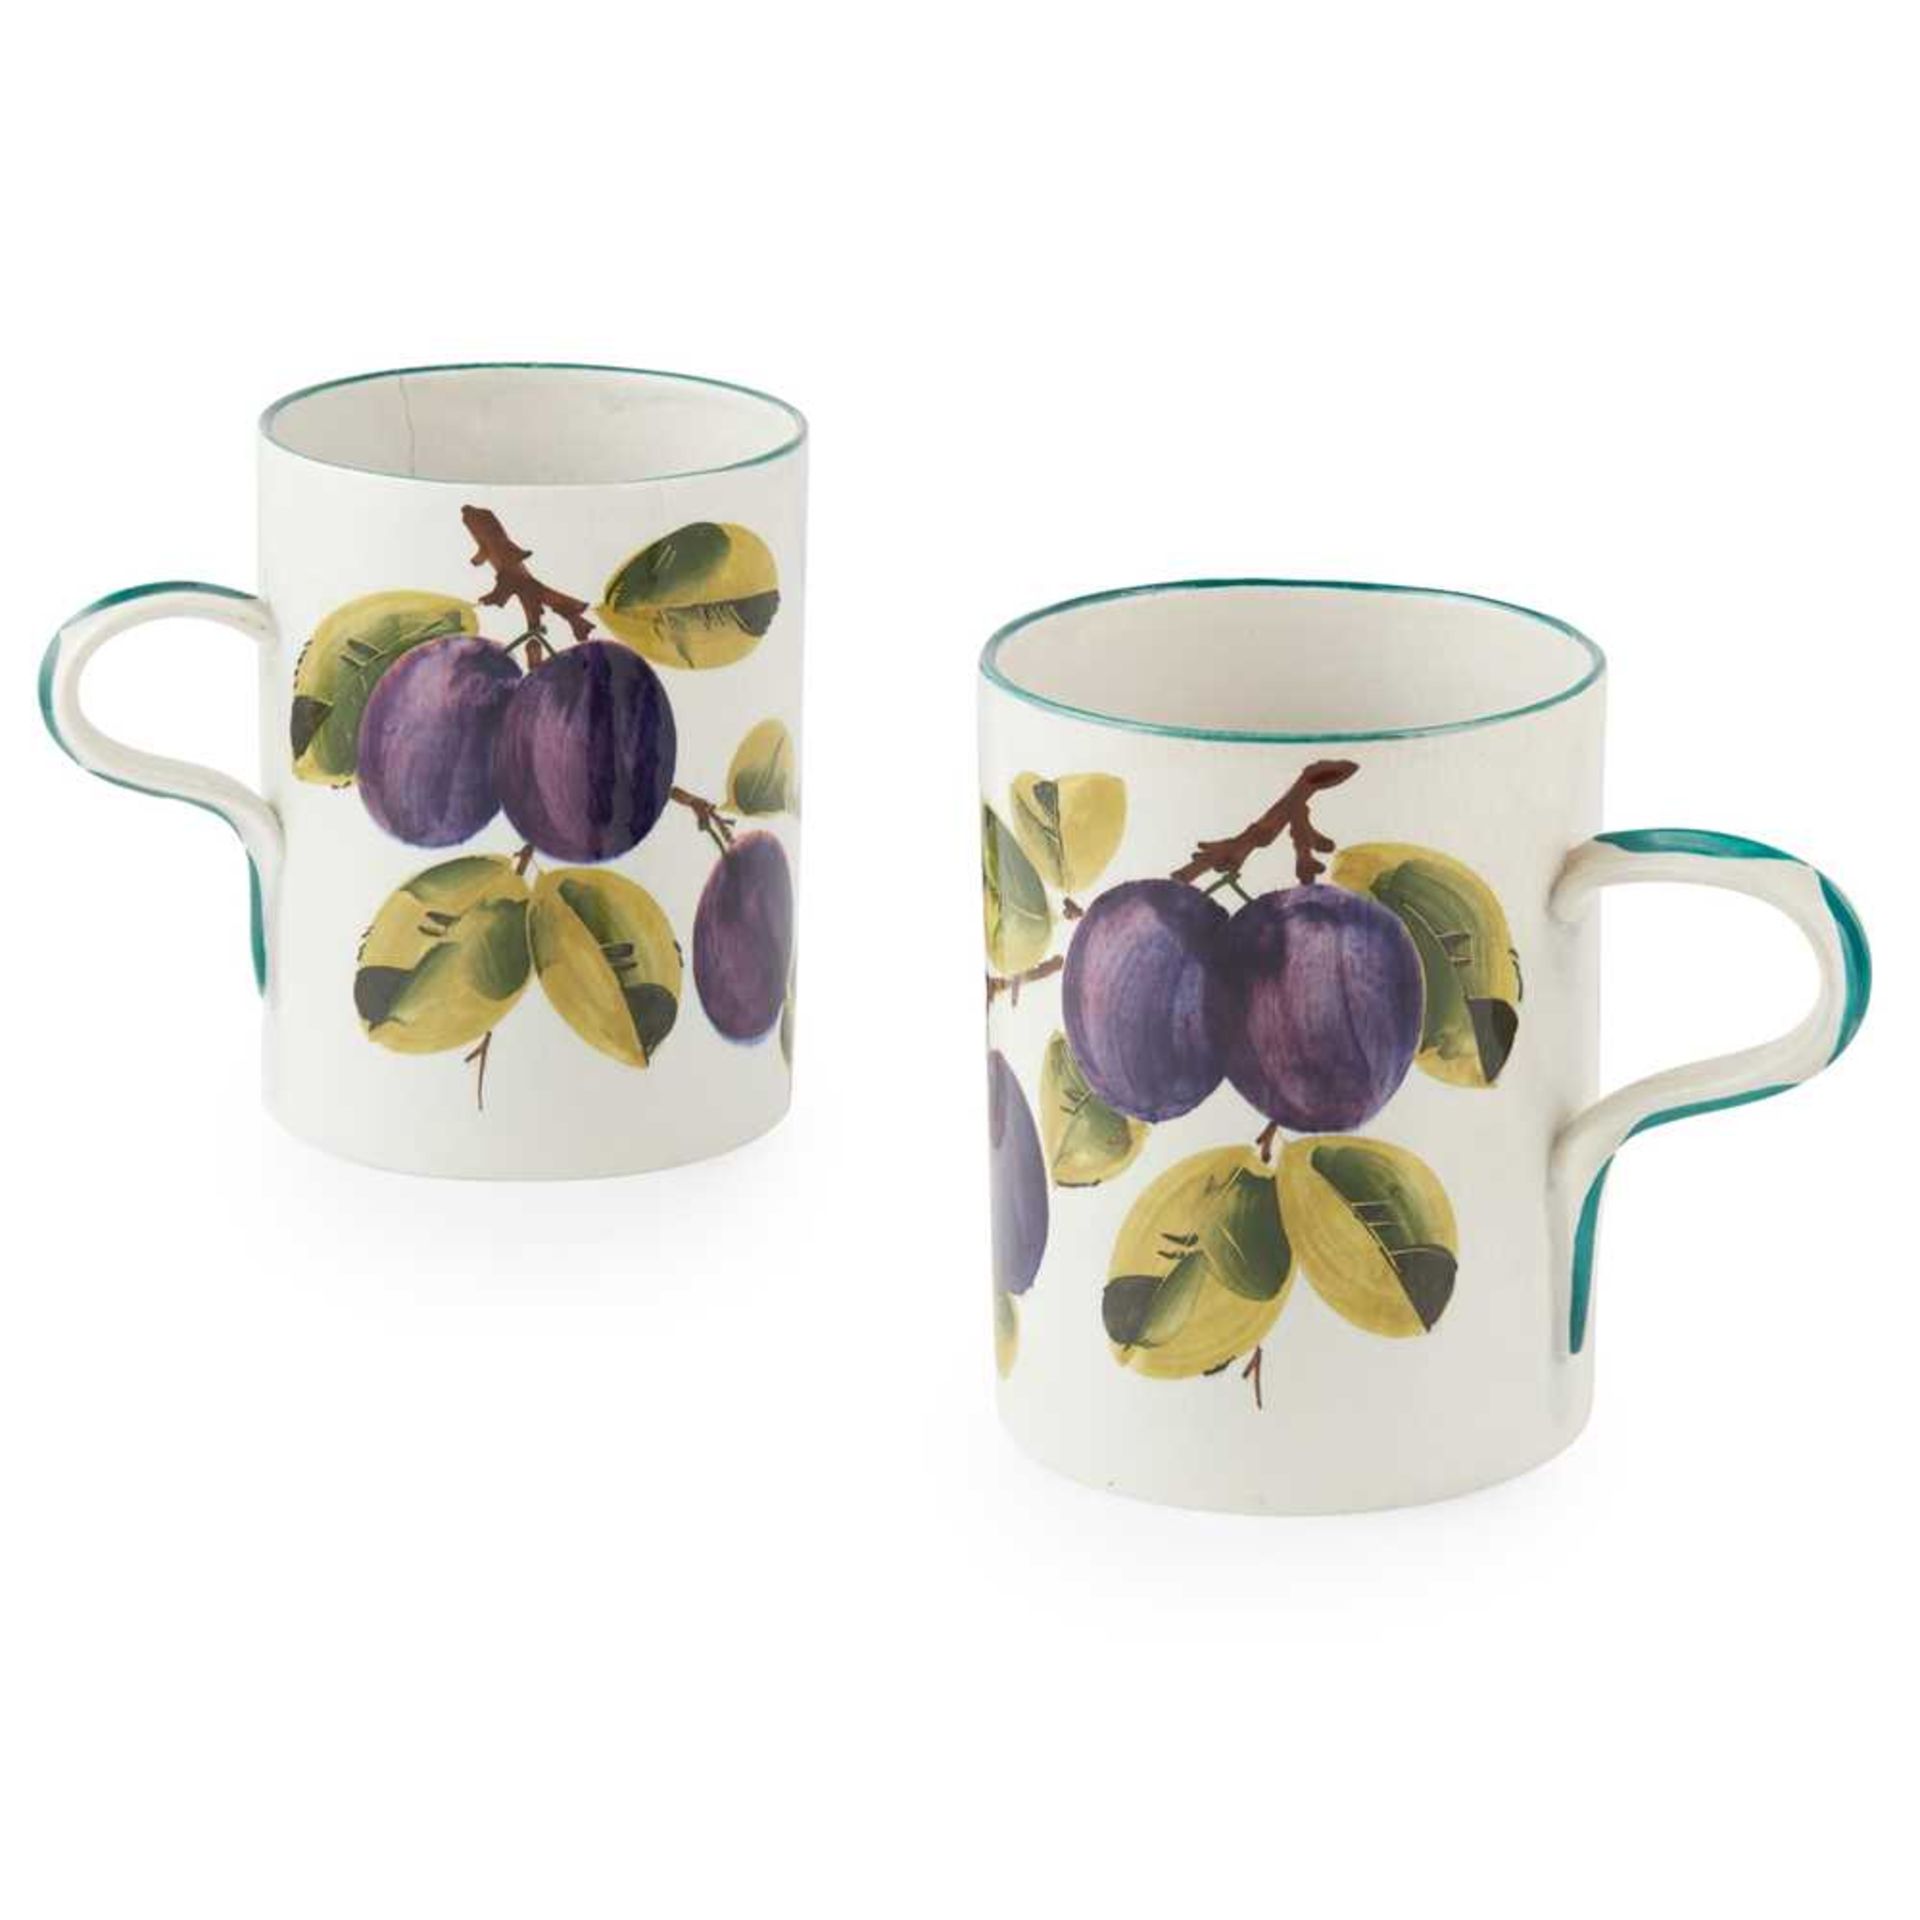 A PAIR OF LARGE WEMYSS WARE MUGS 'PLUMS' PATTERN, EARLY 20TH CENTURY